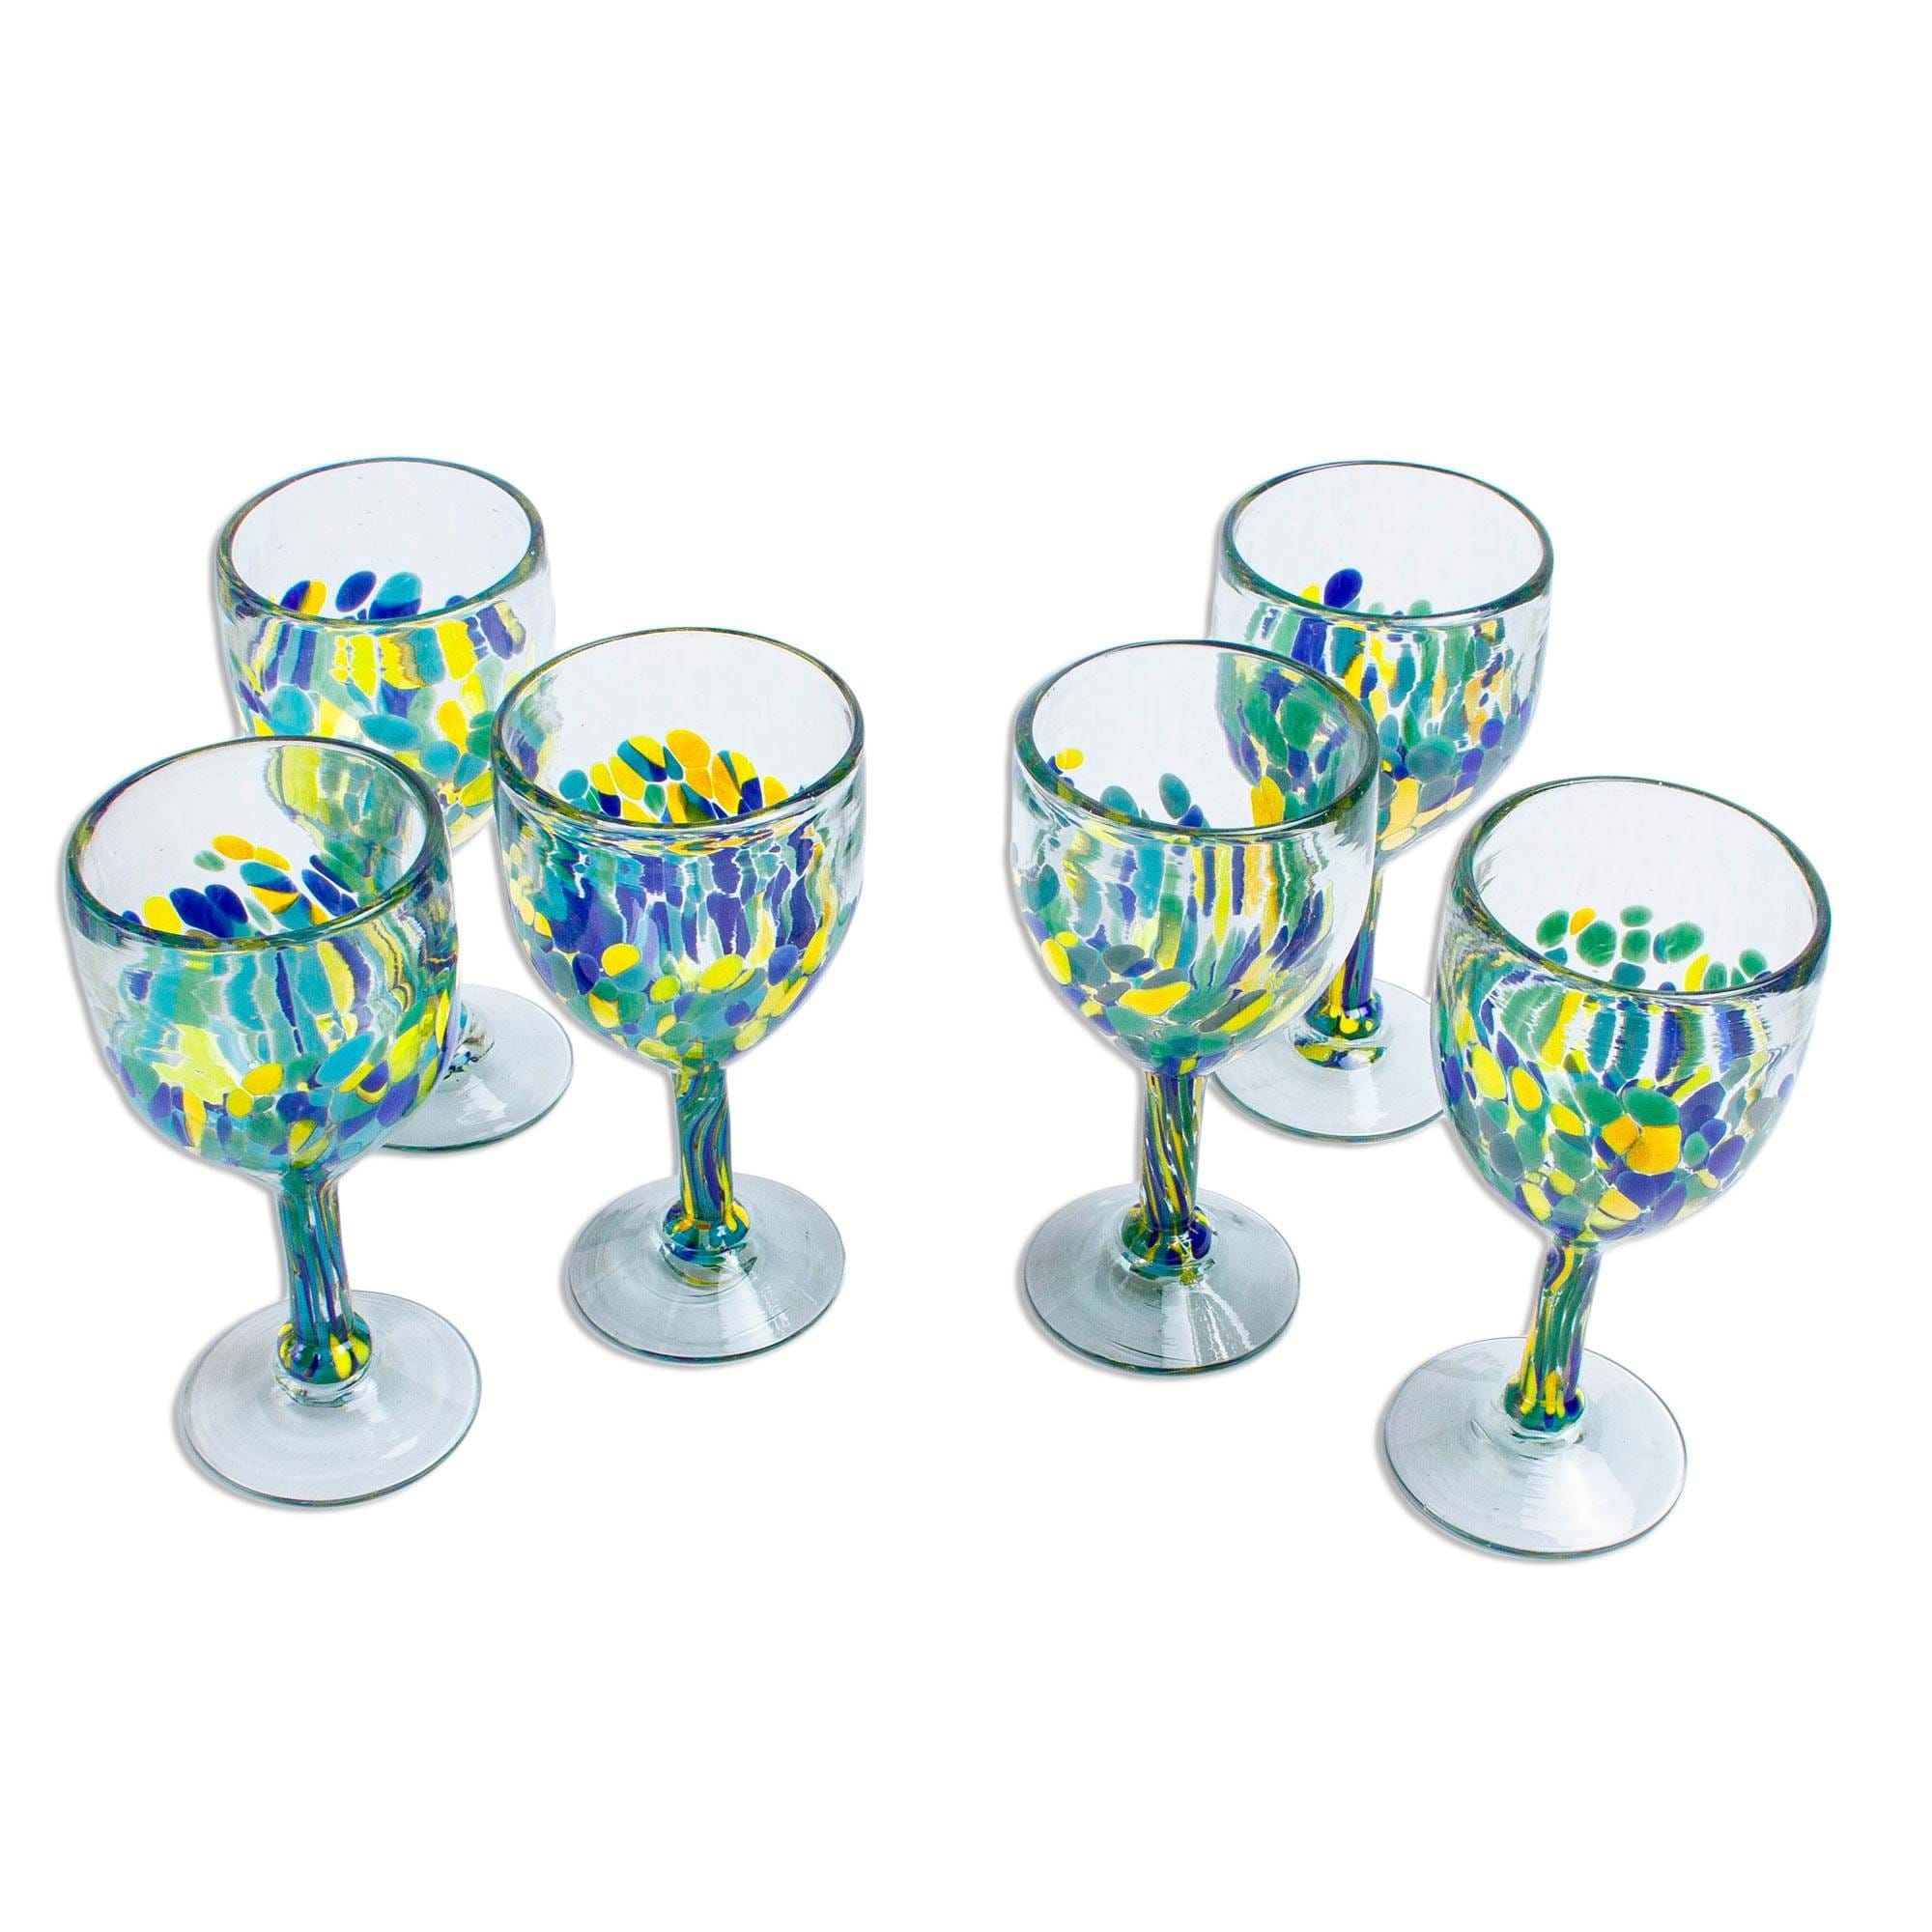 https://ak1.ostkcdn.com/images/products/is/images/direct/610fbd98c19f8e172150d4b68e6a4cf48358608d/Handmade-Tropical-Confetti-glass-wine-glasses-%28Mexico%29.jpg